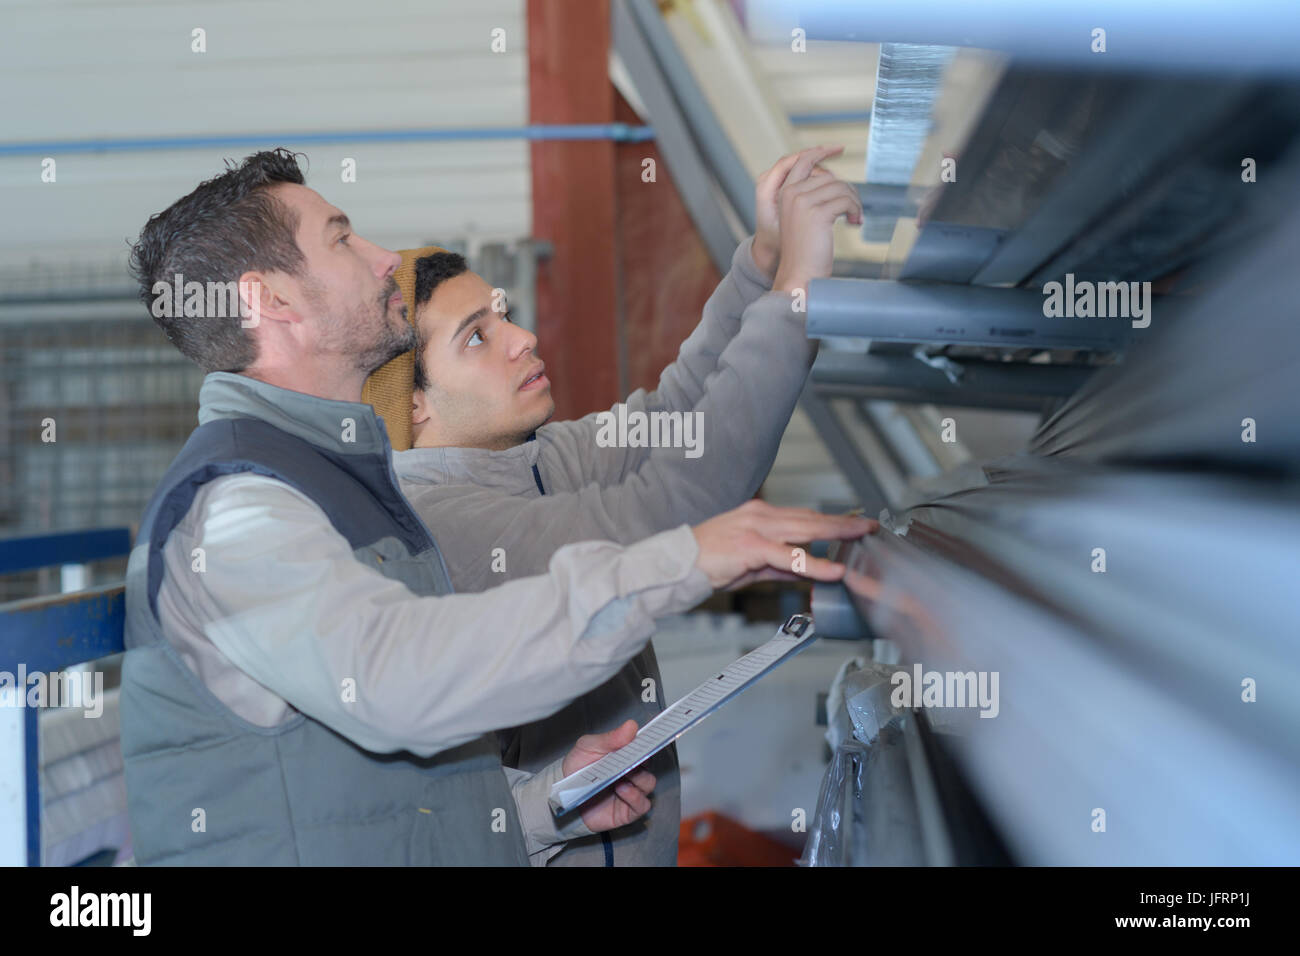 warehouse workers reaching for something in racking storage of goods Stock Photo